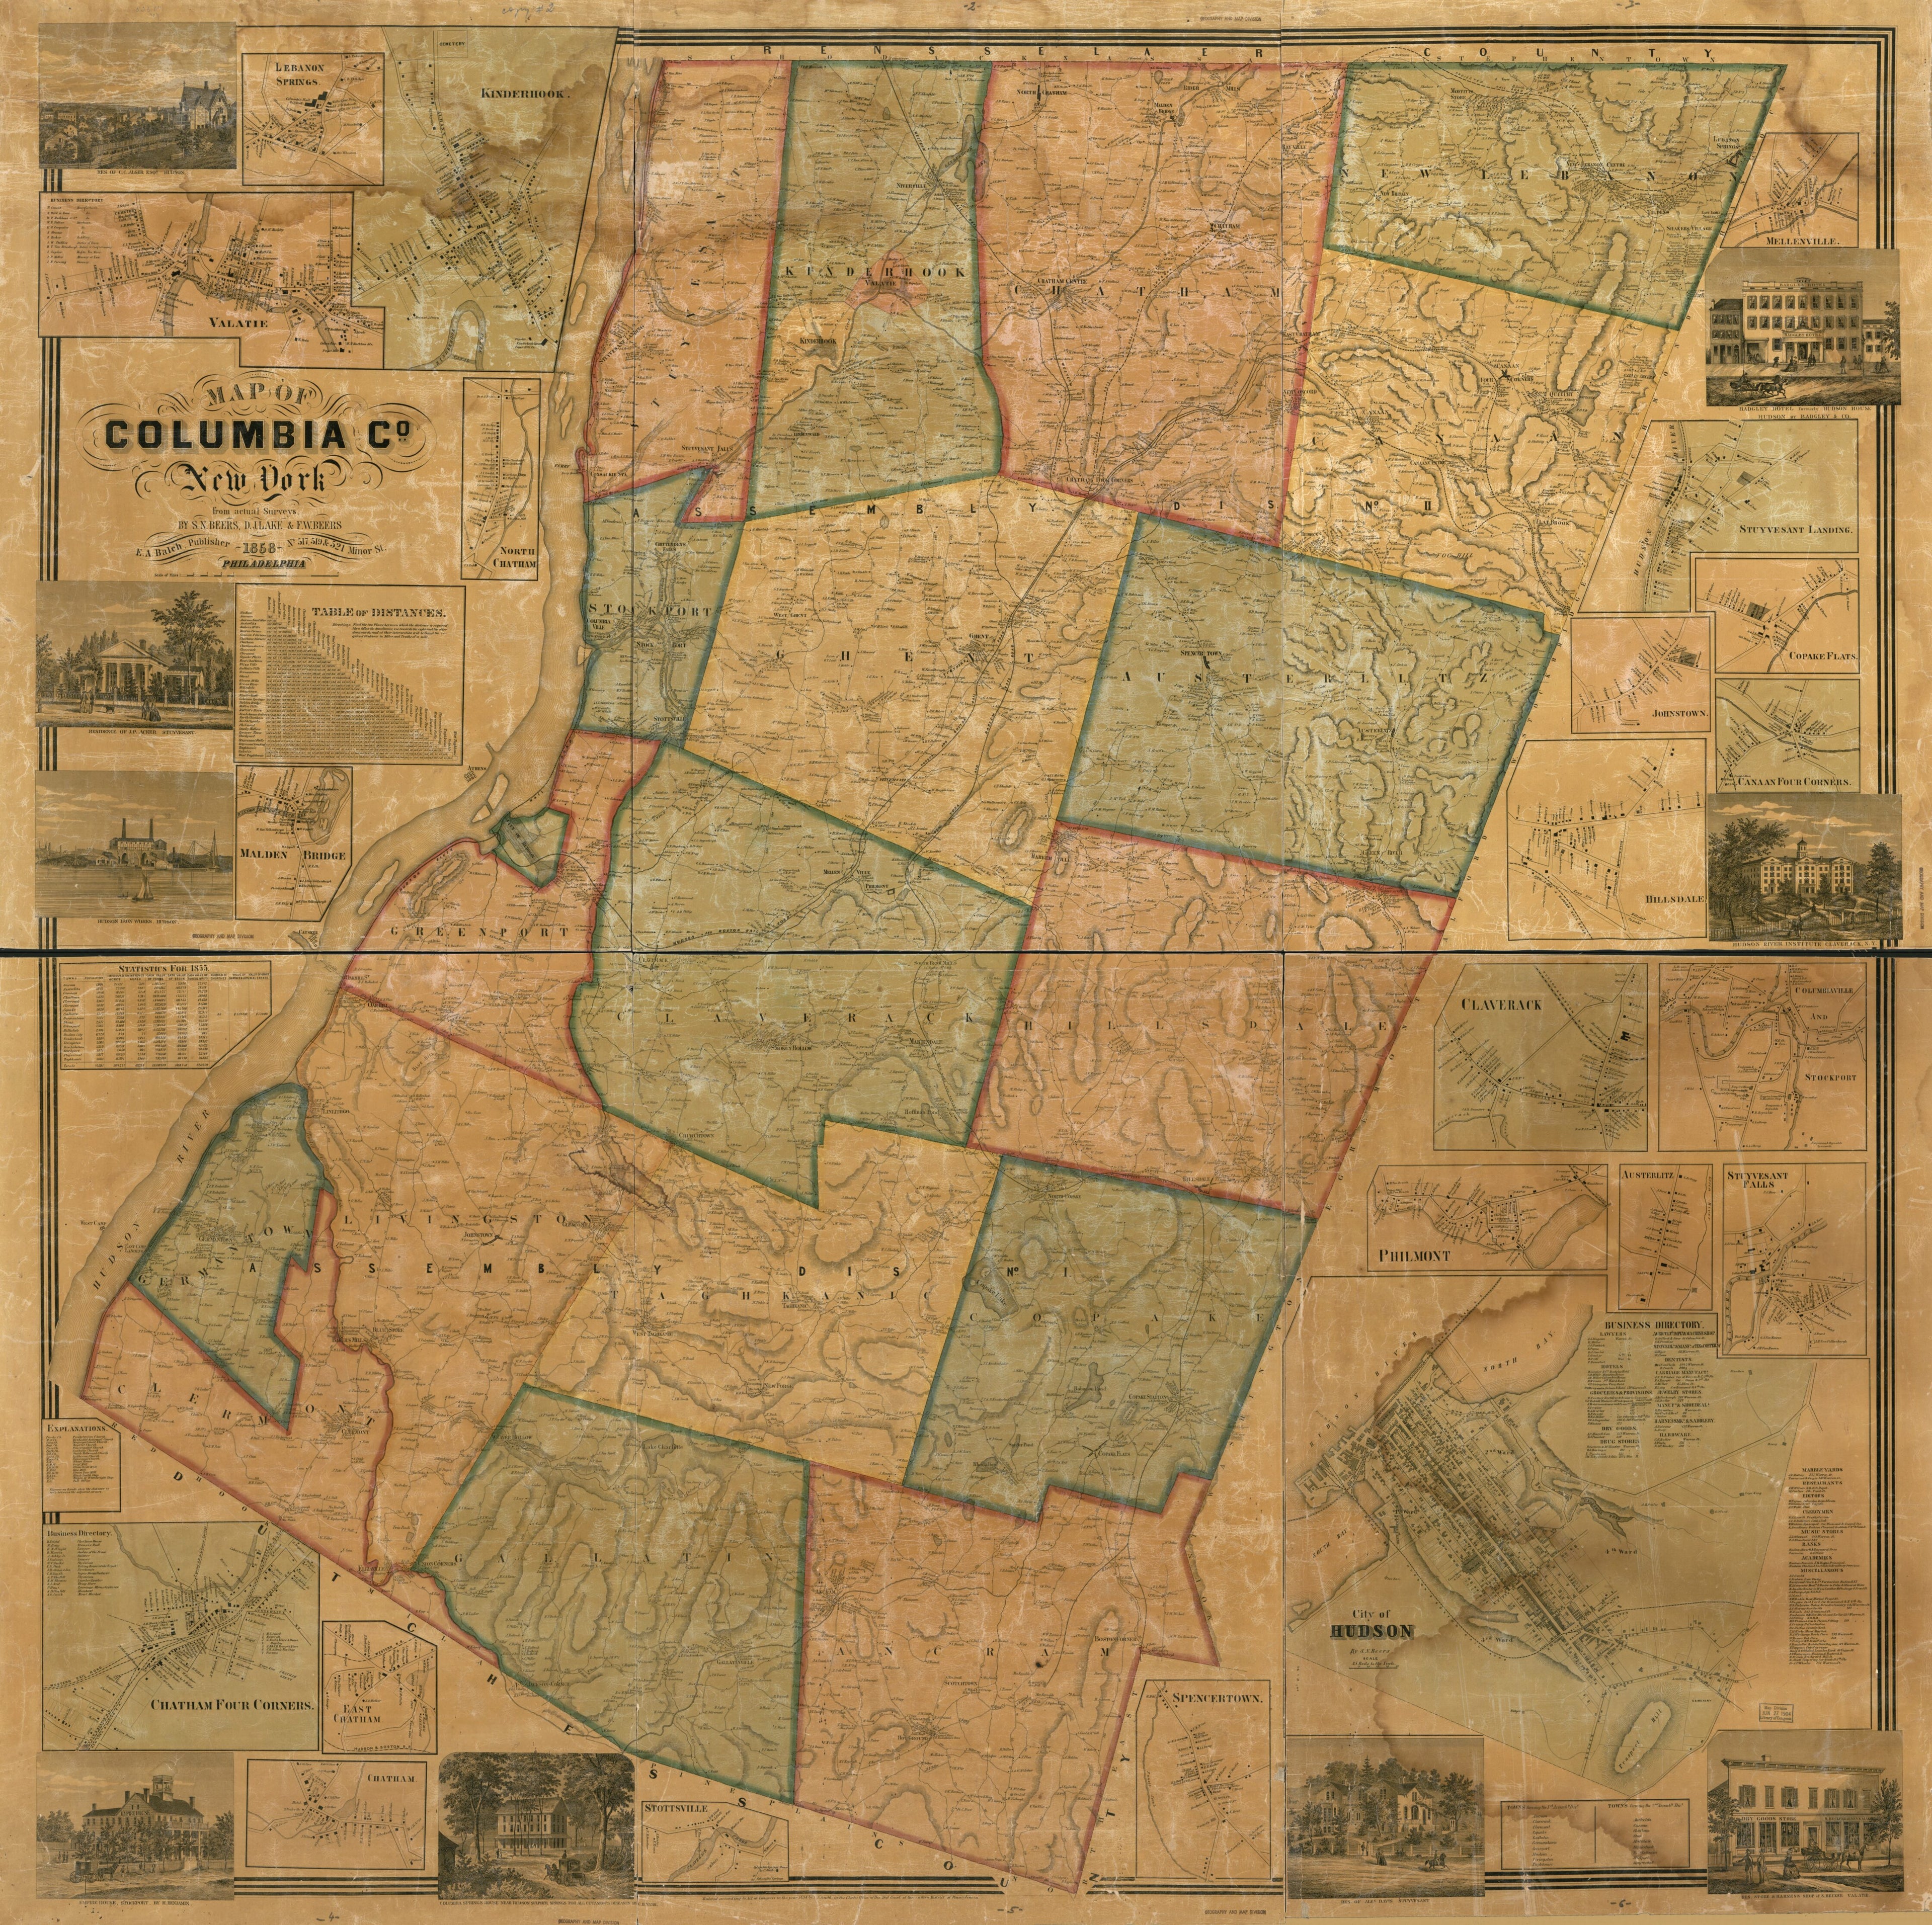 This old map of Map of Columbia Co., New York : from Actual Surveys from 1858 was created by F. W. (Frederick W.) Beers, S. N. Beers, D. J. Lake in 1858